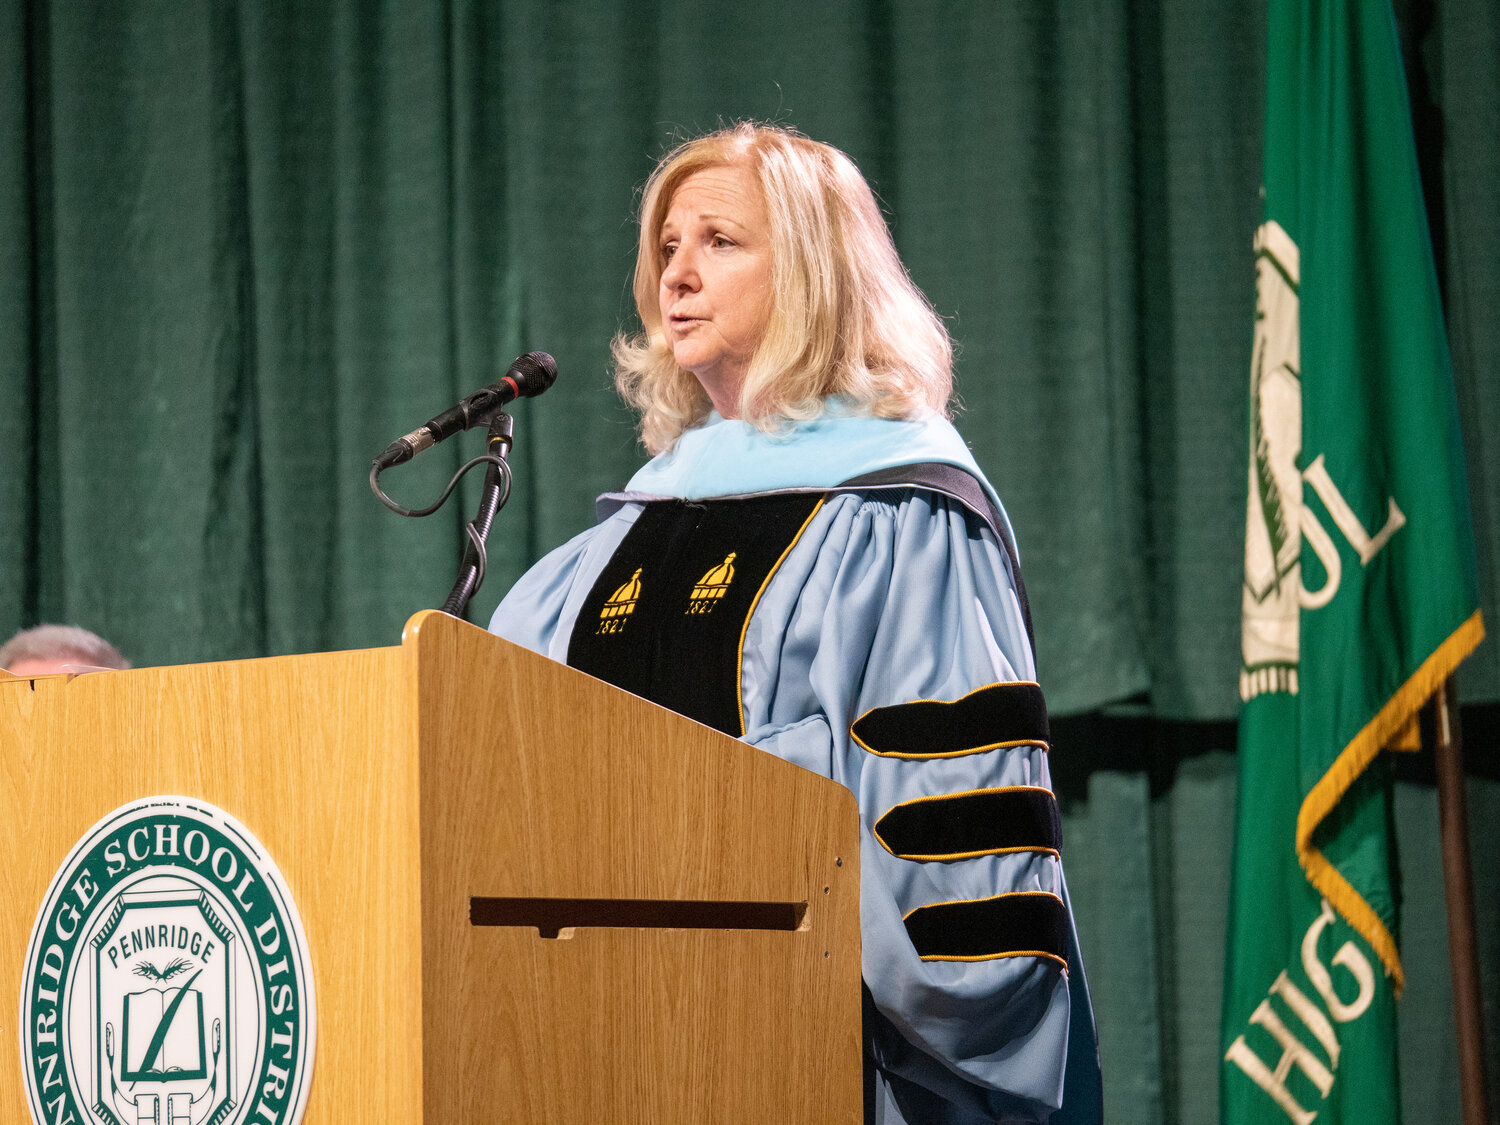 Dr. Kathy Scheid, assistant superintendent for secondary education, addresses the Pennridge High School Class of 2023 during Tuesday's commencement.